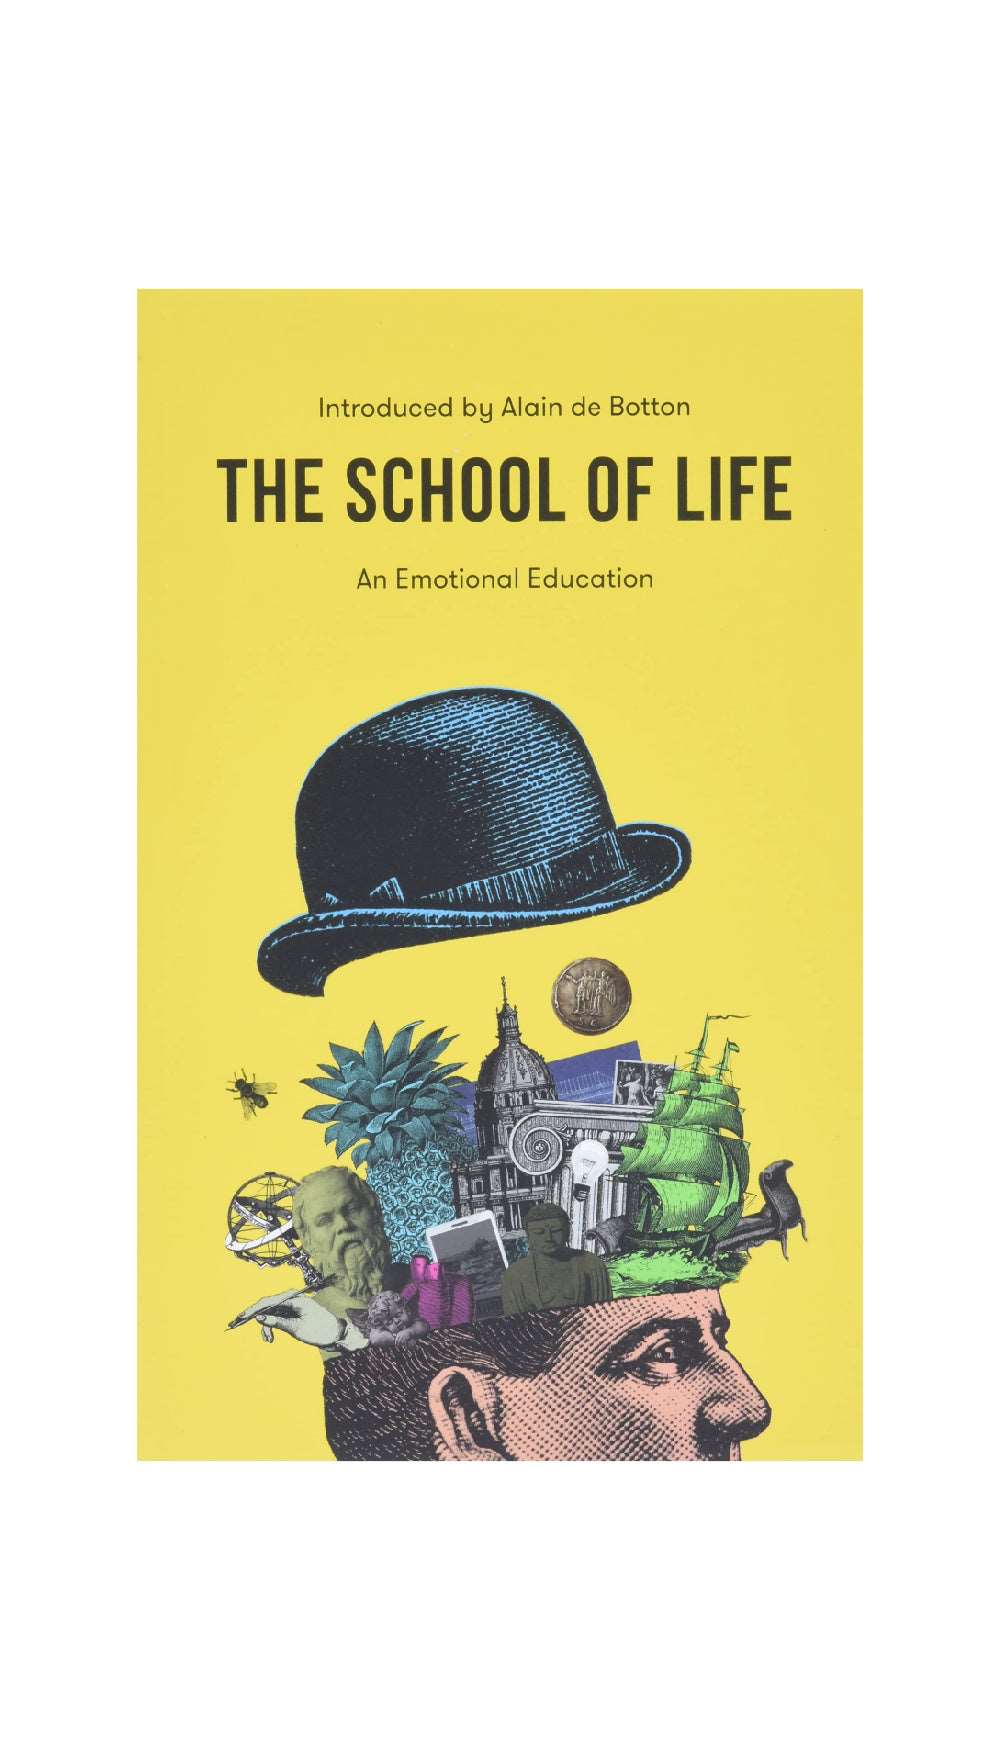 An Emotional Education / THE SCHOOL OF LIFE